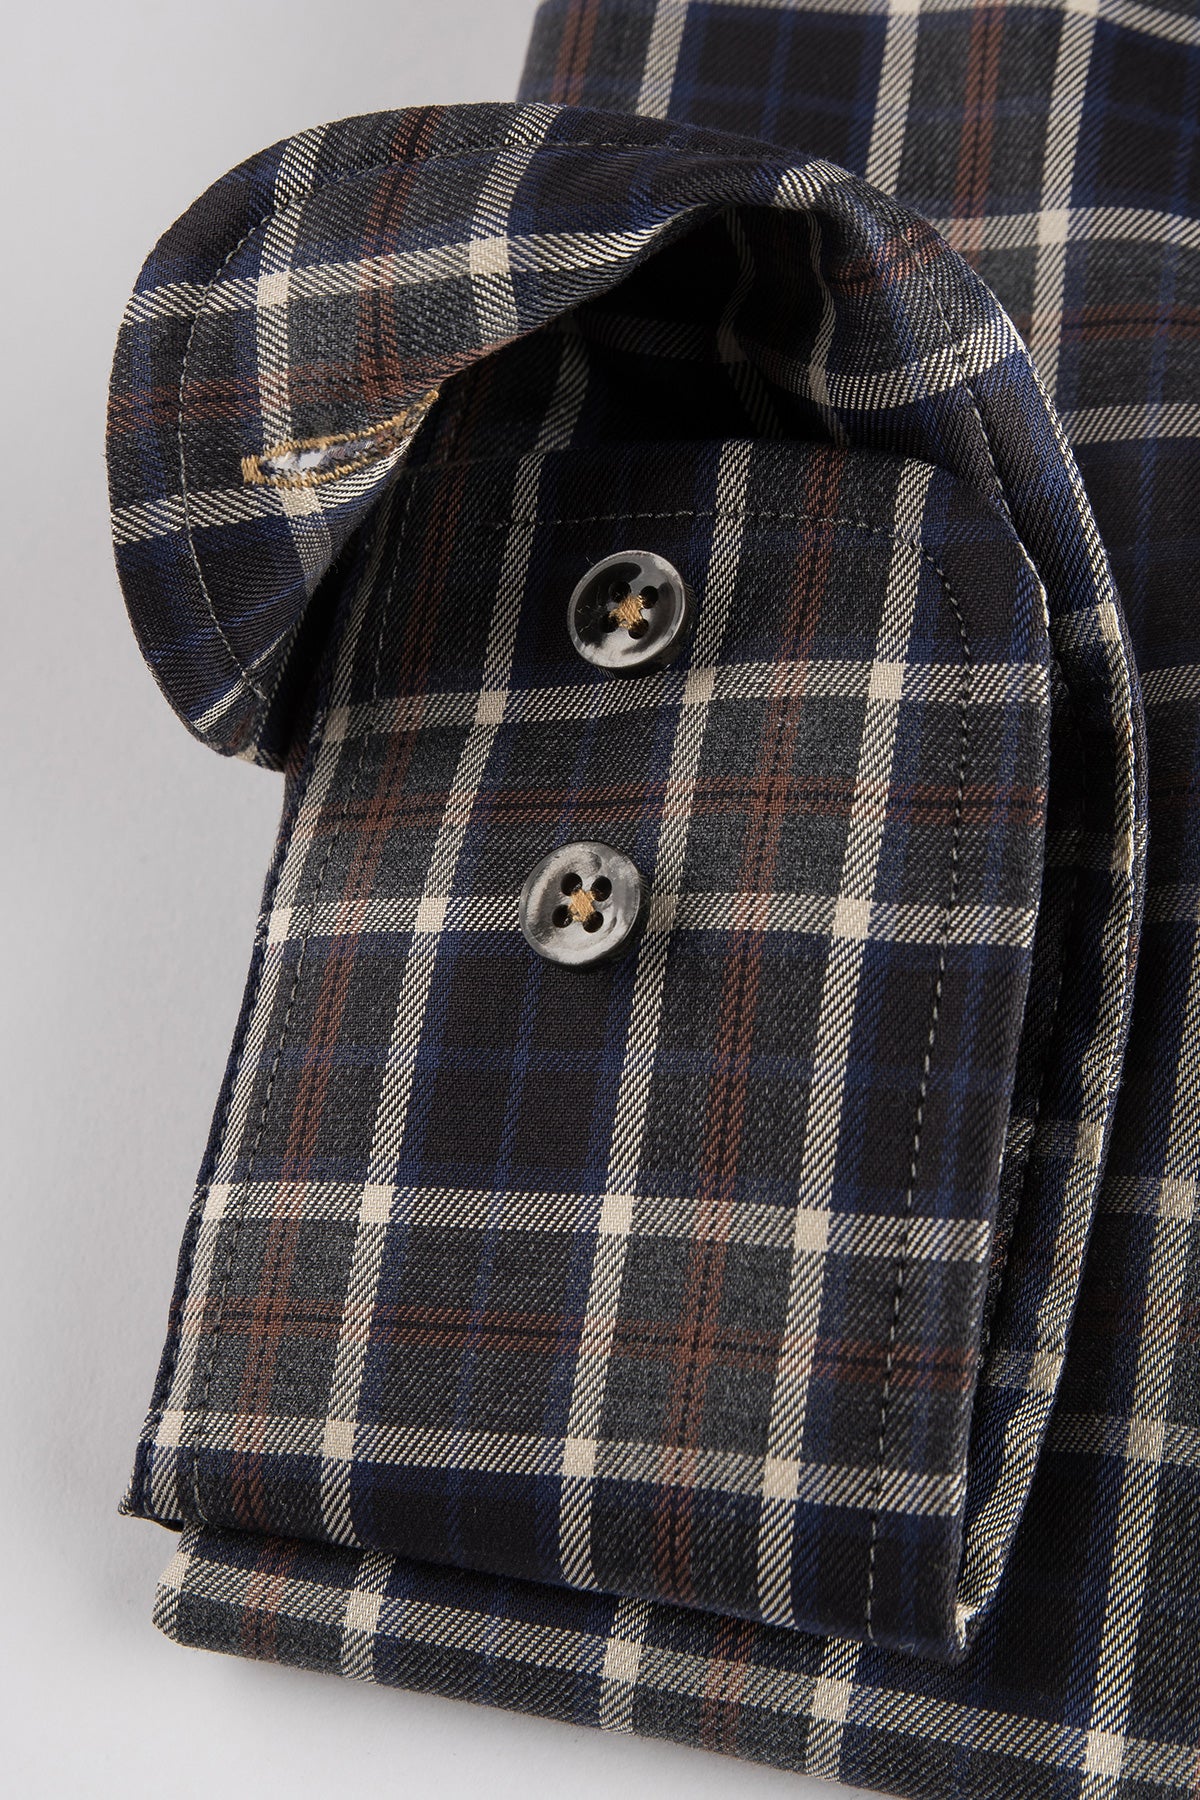 Black checked flannel button down regular fit shirt